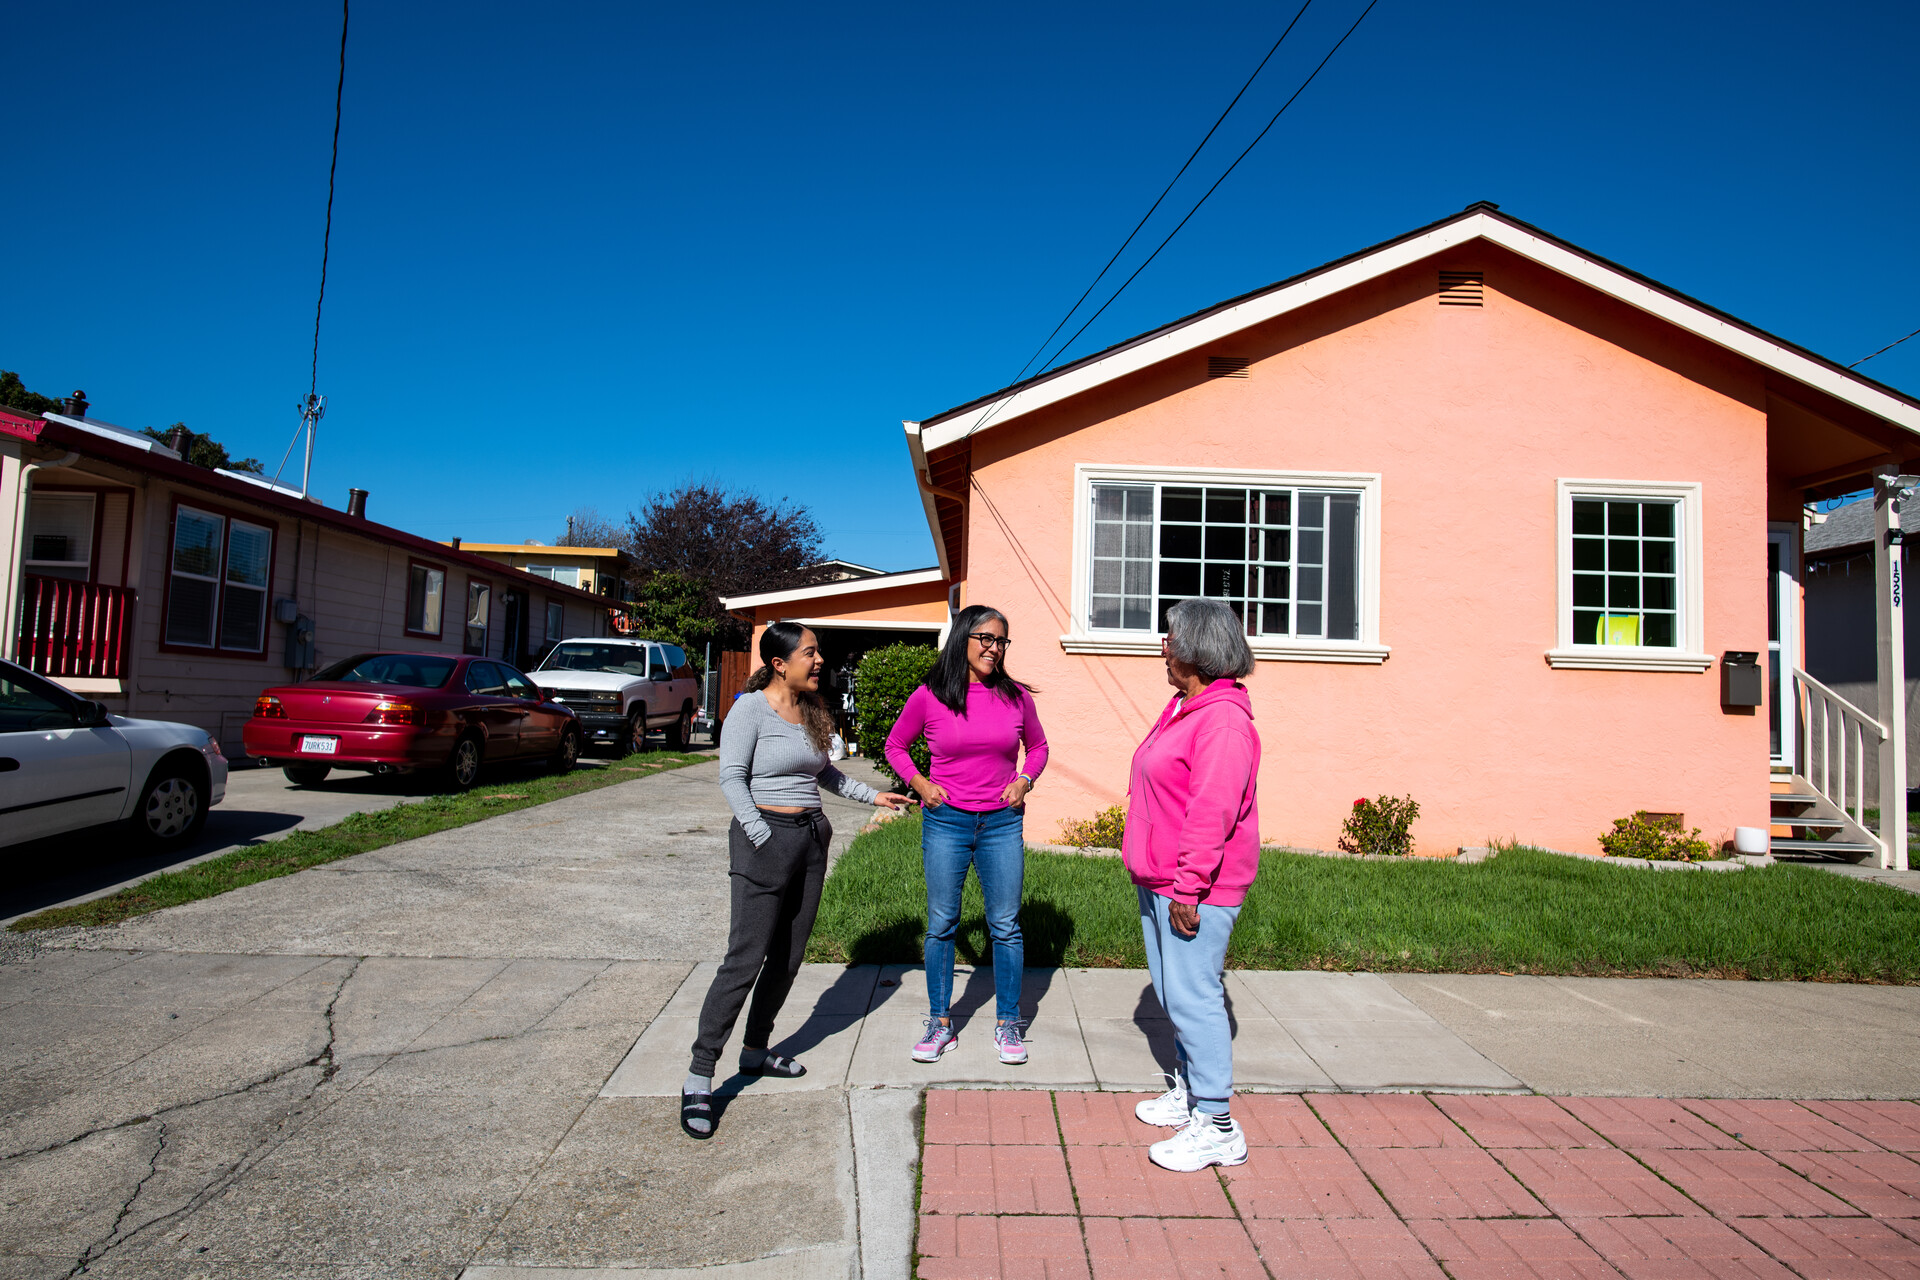 Three women stand by each other having a conversation on the sidewalk in front of a pink house.